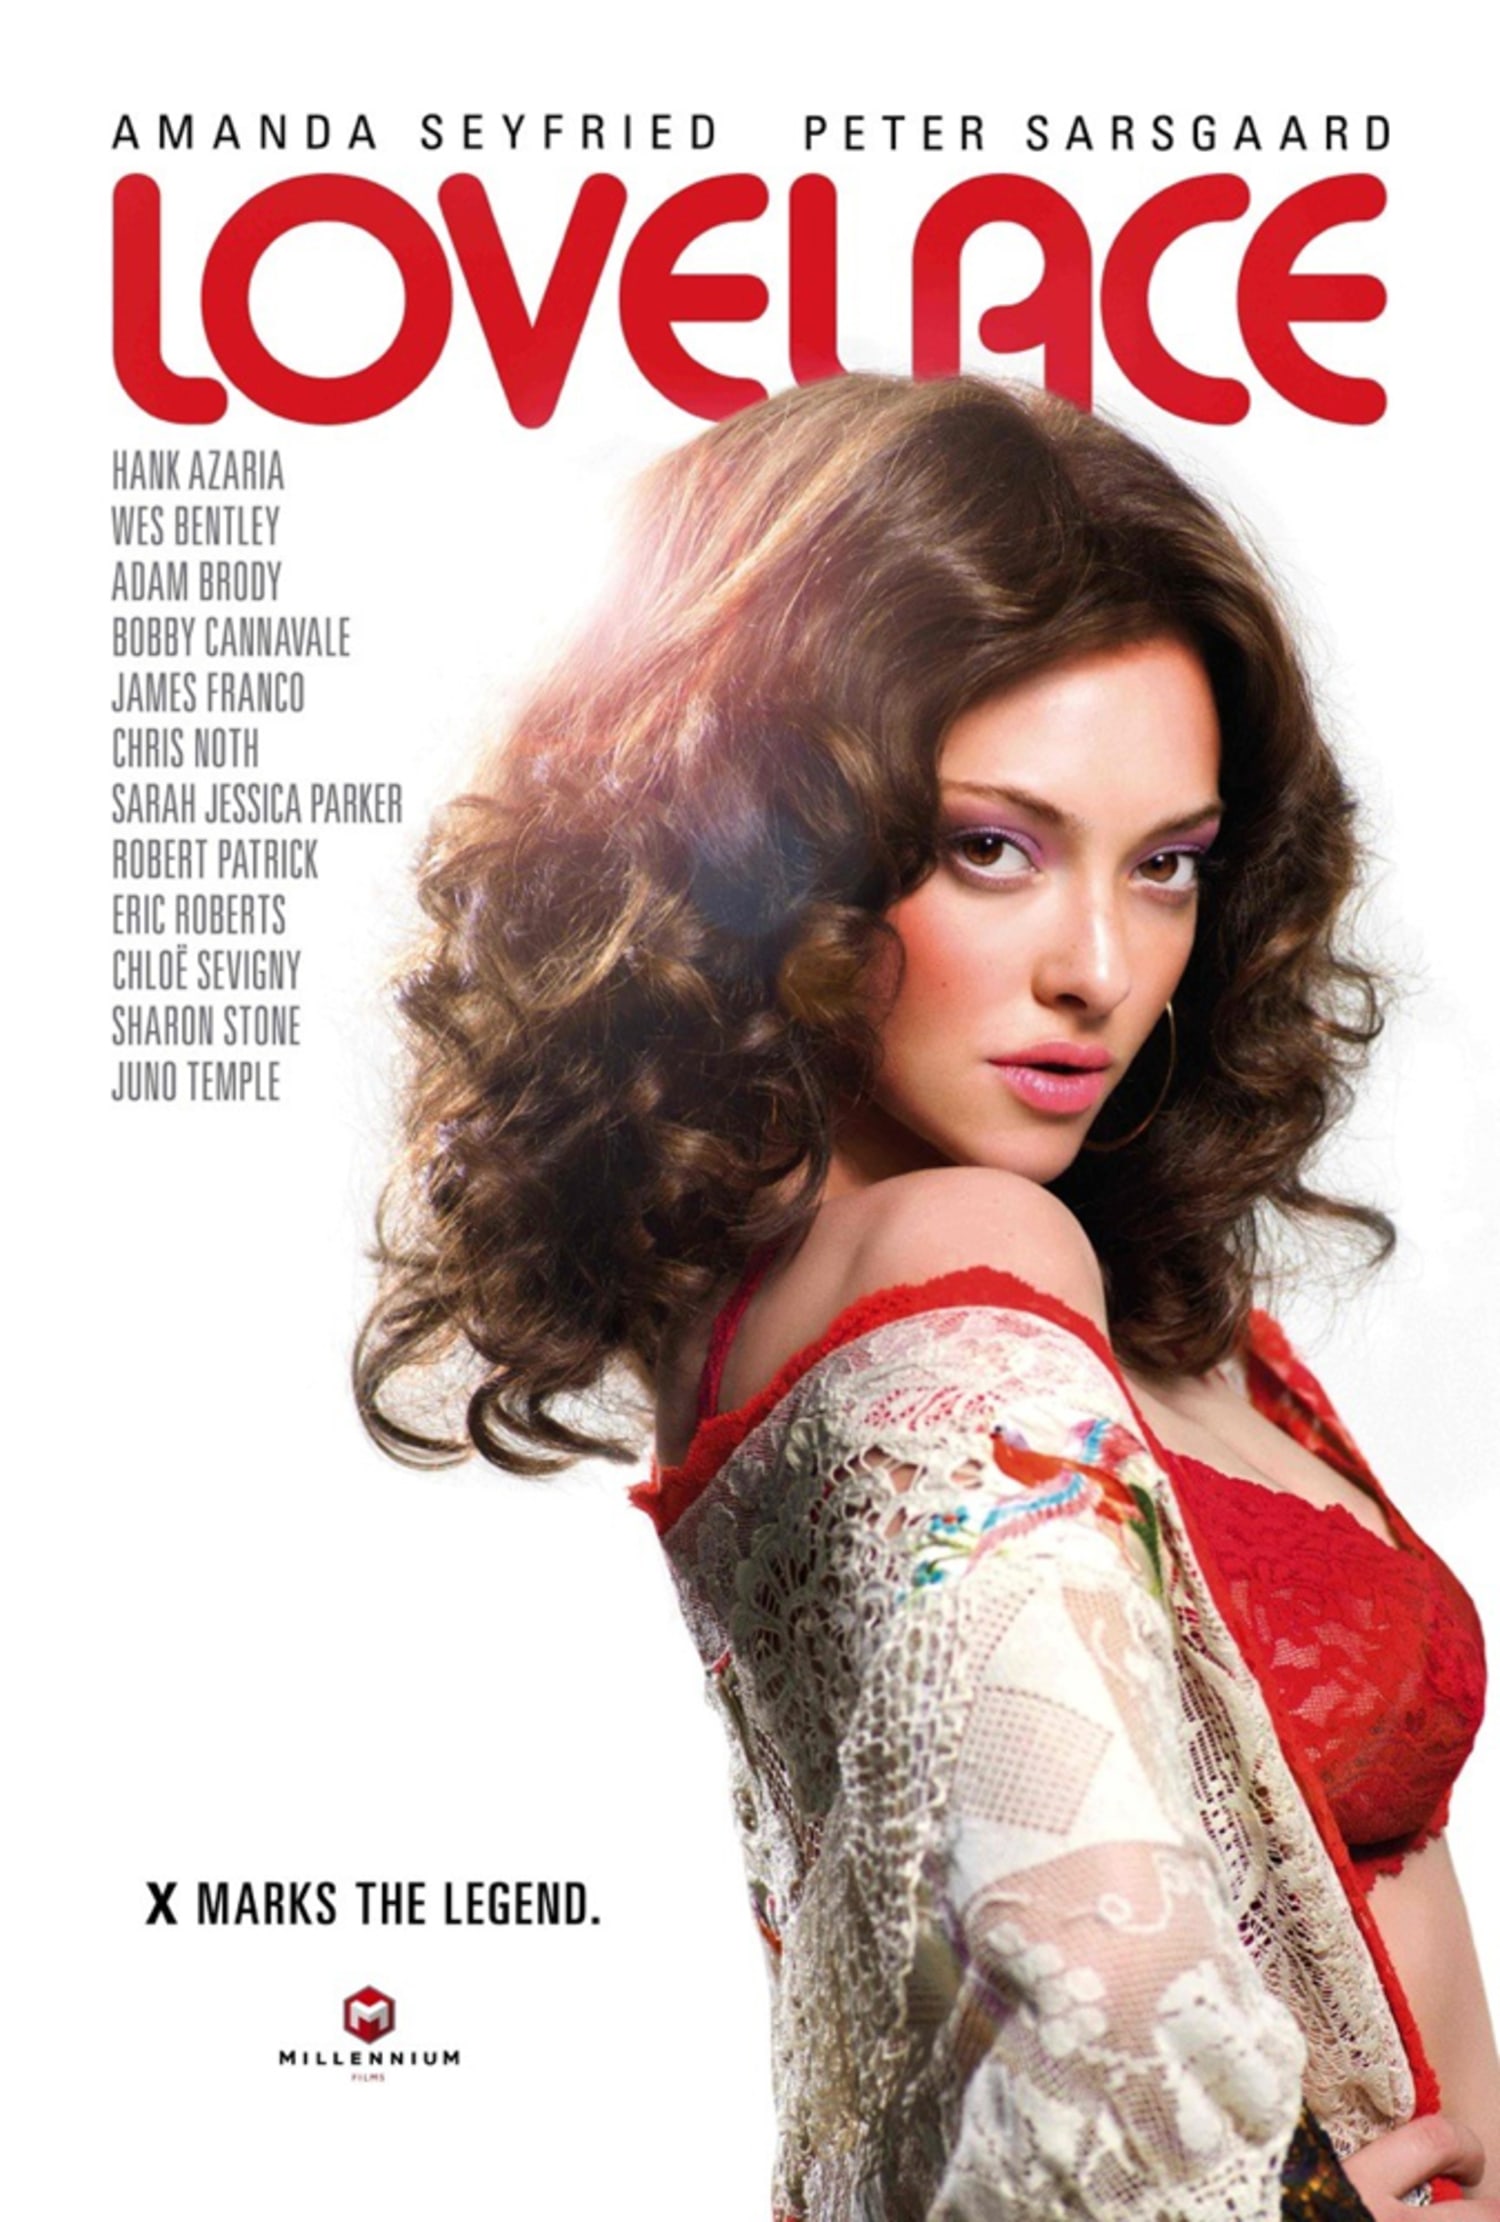 70s Porn Star James Franco - First look at poster for porn star biopic 'Lovelace'